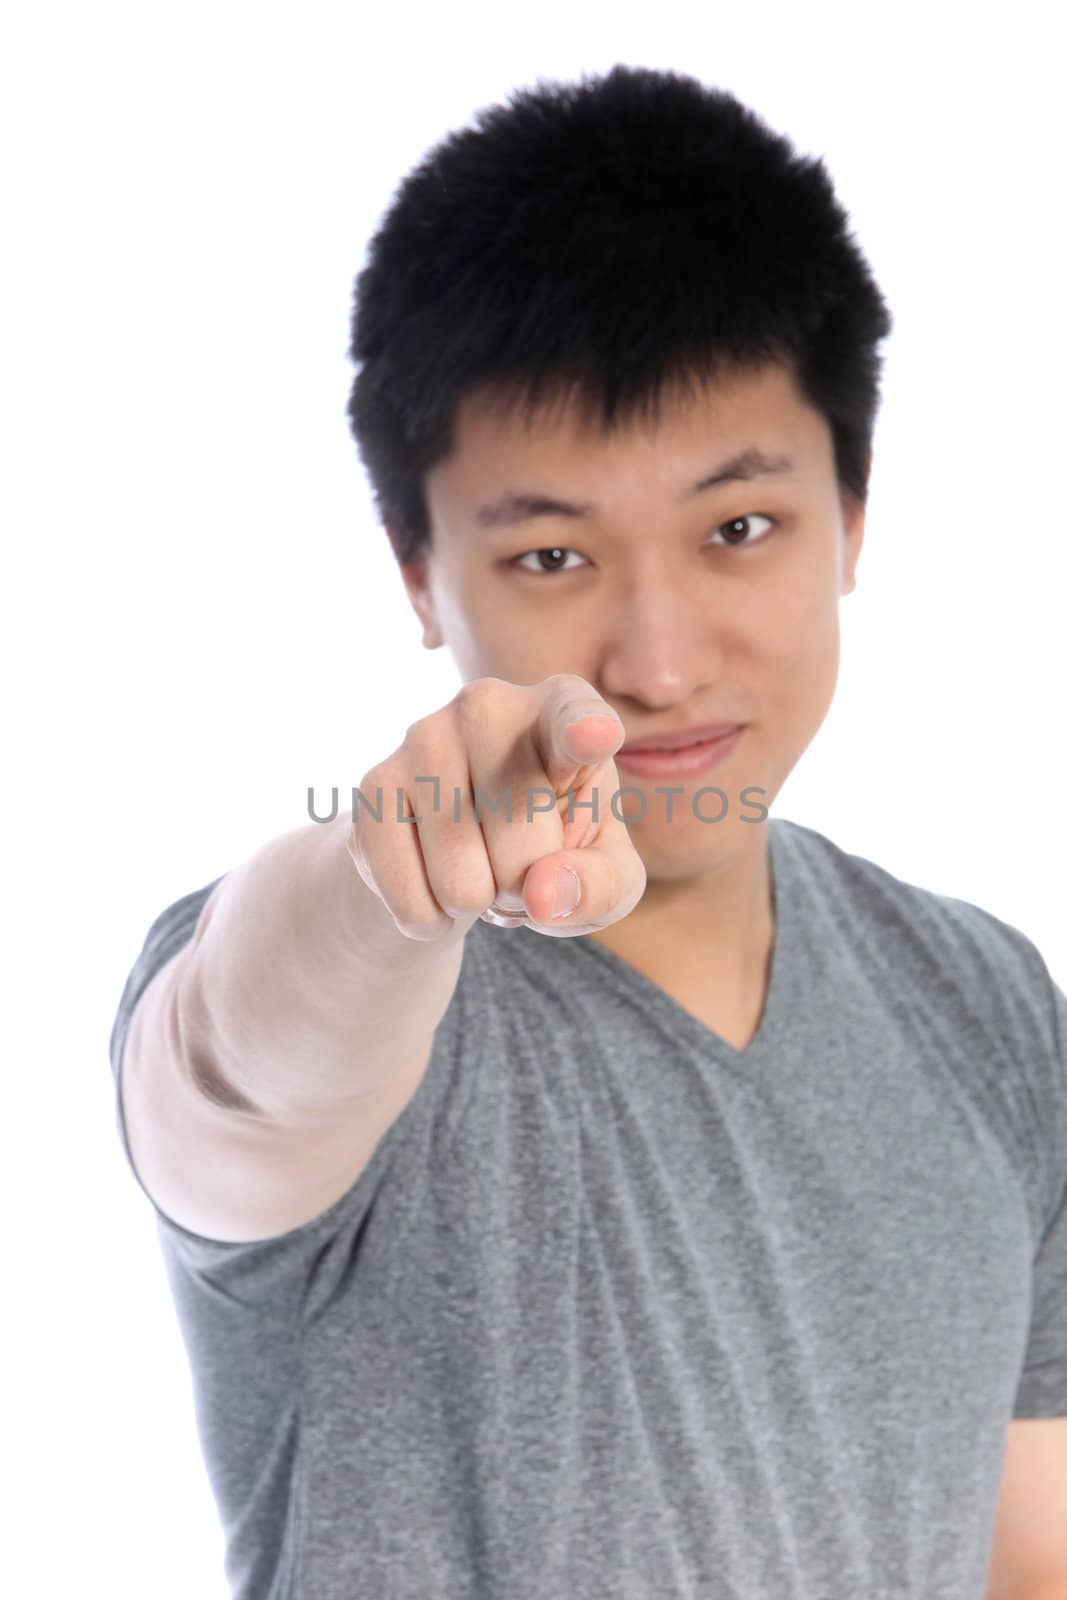 Asian man with a stern expression pointing an accusatory finger directly at the camera